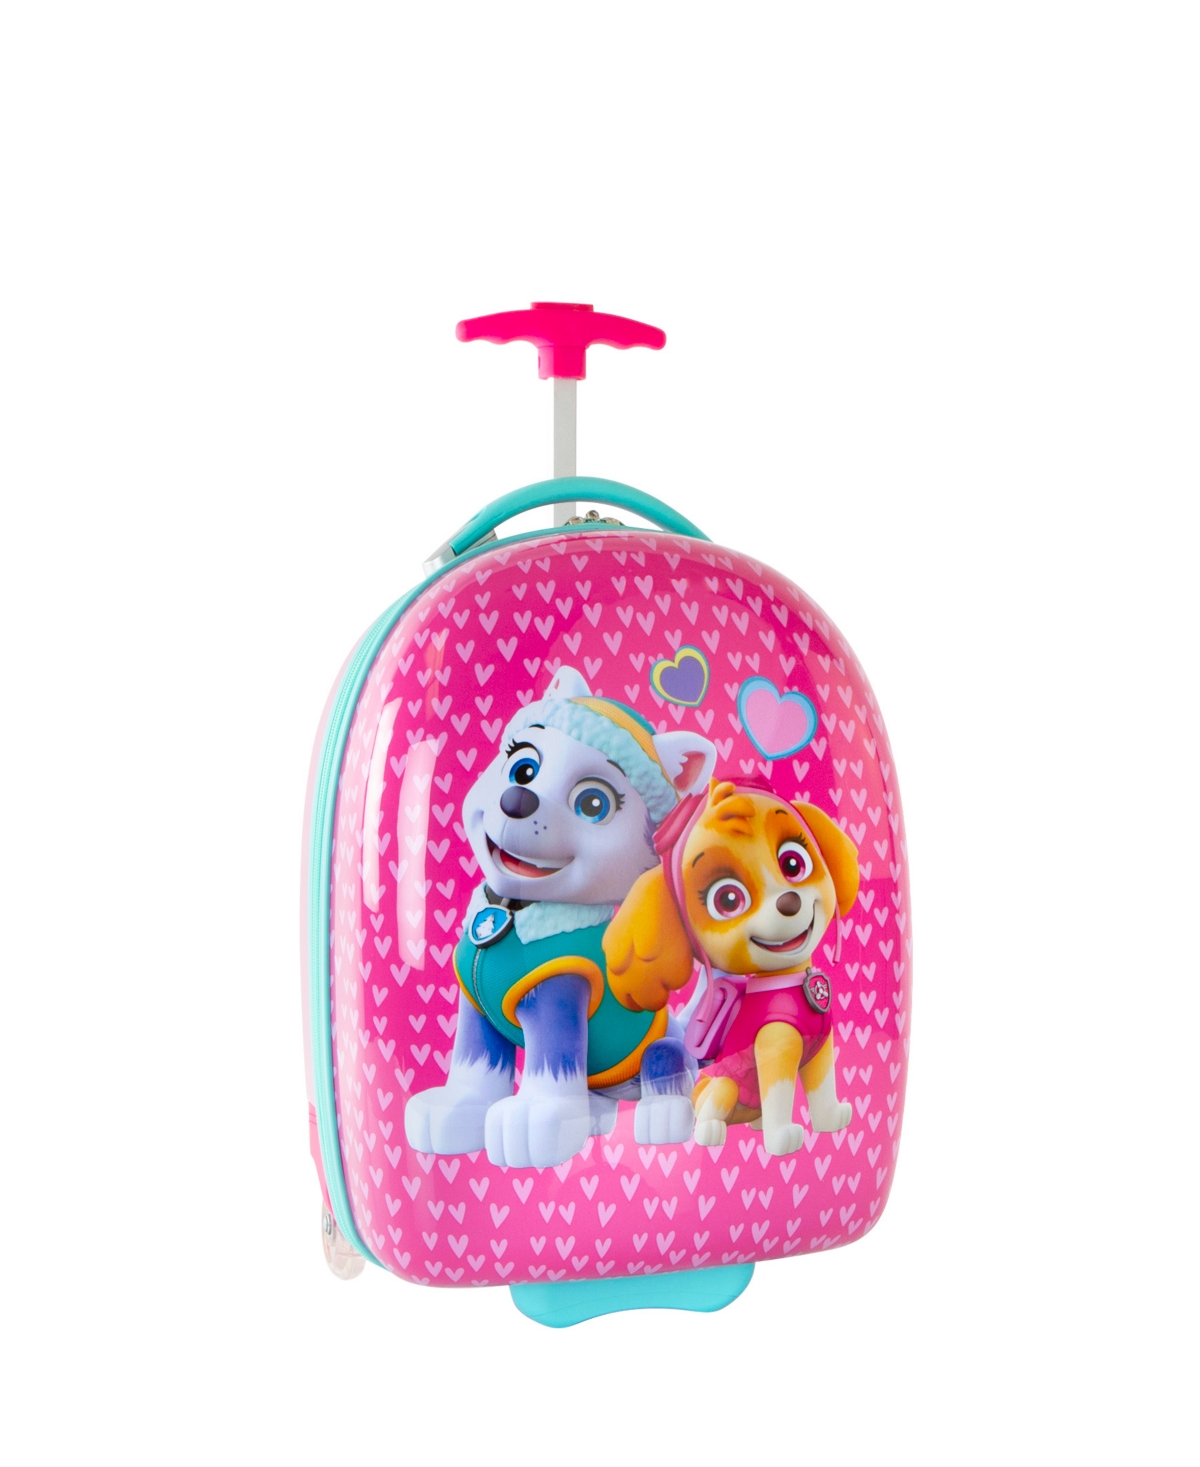 Nickelodeon Paw Patrol 18" Round Carry-On Luggage - Pink